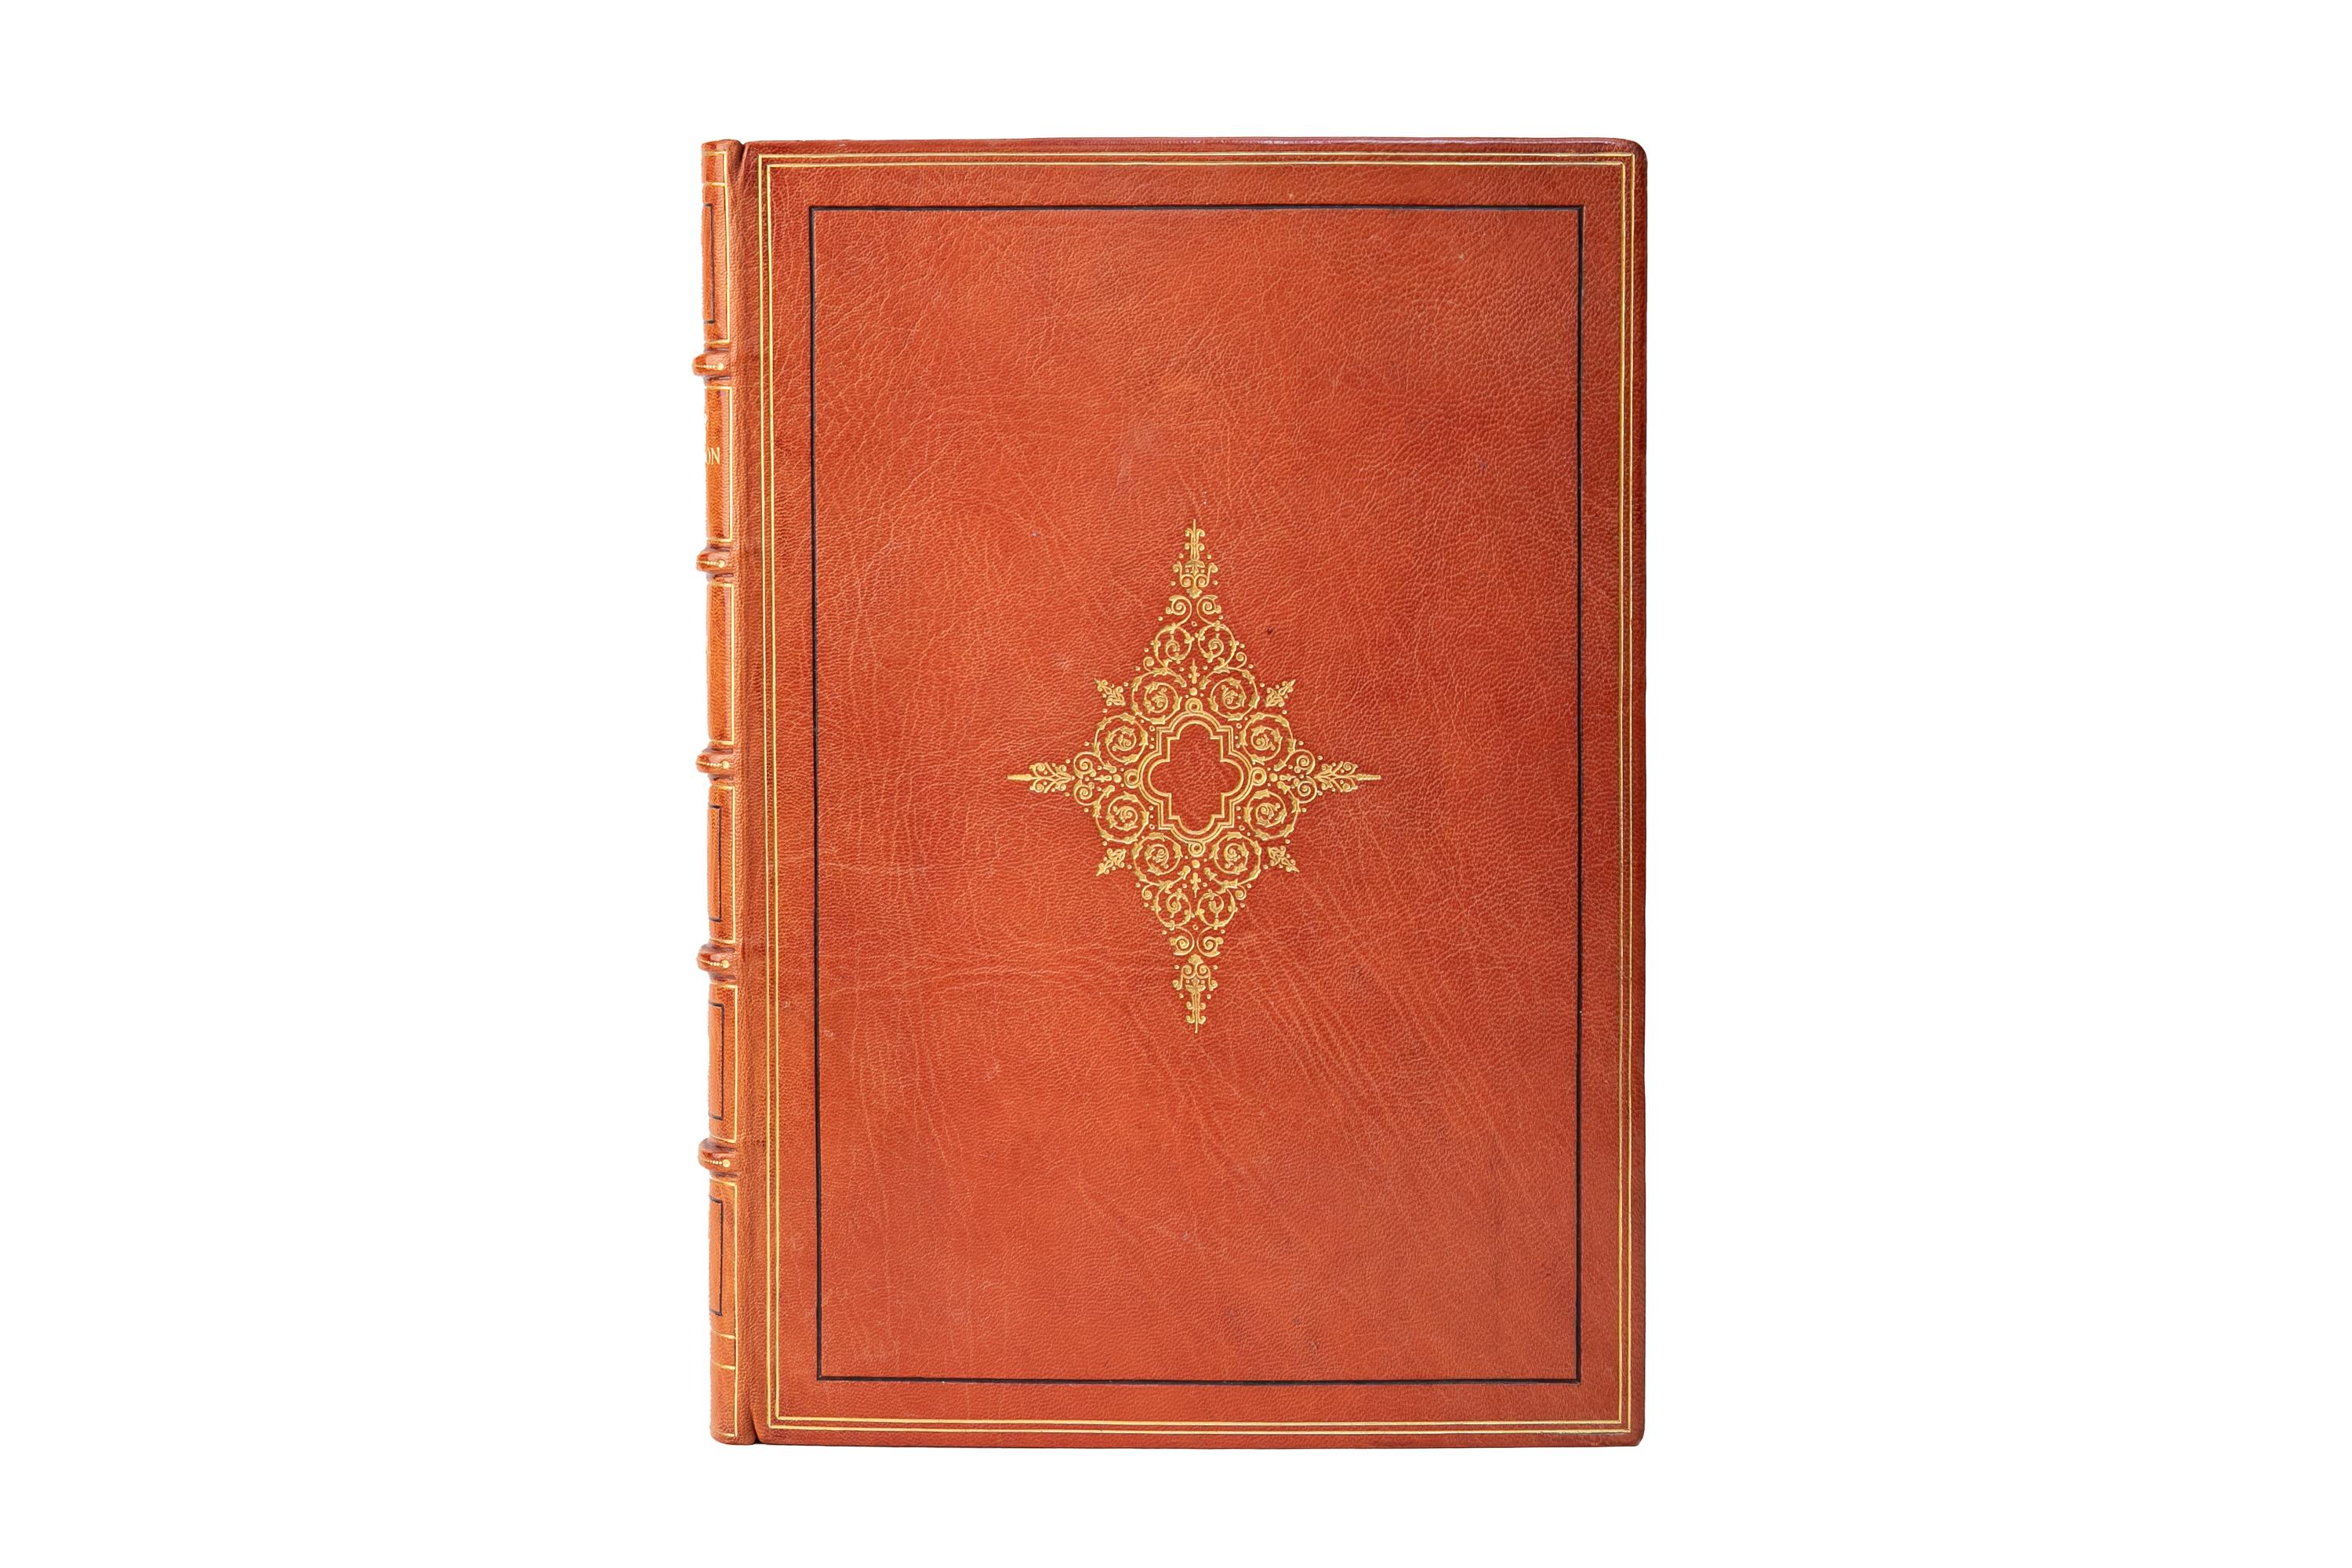 2 Volumes. Worthington Chauncey Ford, George Washington. Memorial Edition. Bound by Zaehnsdorf in full orange morocco with the covers and raised band spines decorated in gilt and black tooled detailing. The top edges are gilt with gilt-tooled